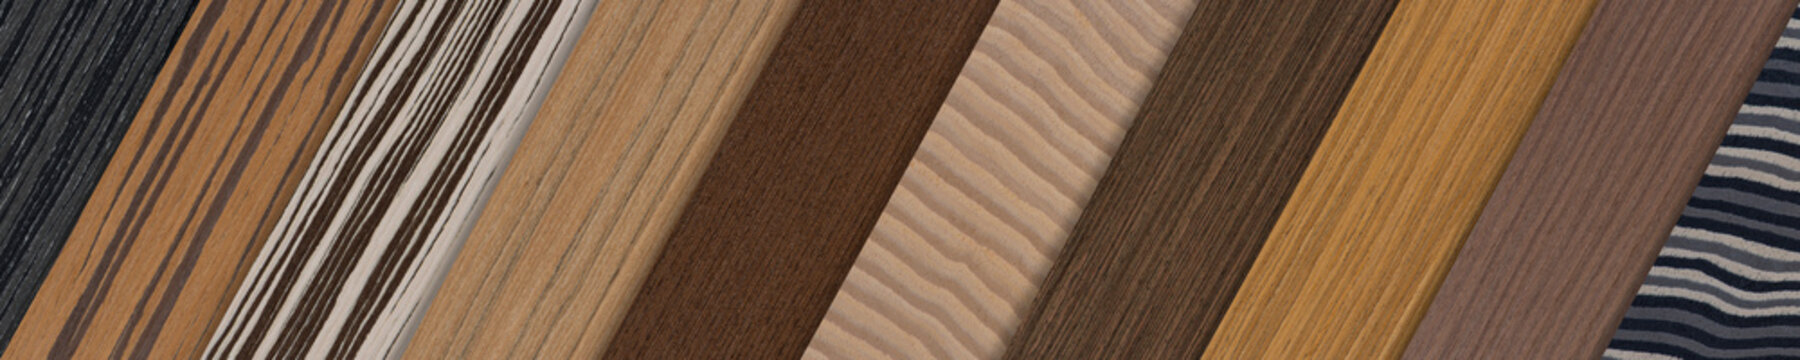 Samples of wood of different species. Pieces of wood veneer in different shades and textures. Samples of wood for the production of floor furniture or doors top view.